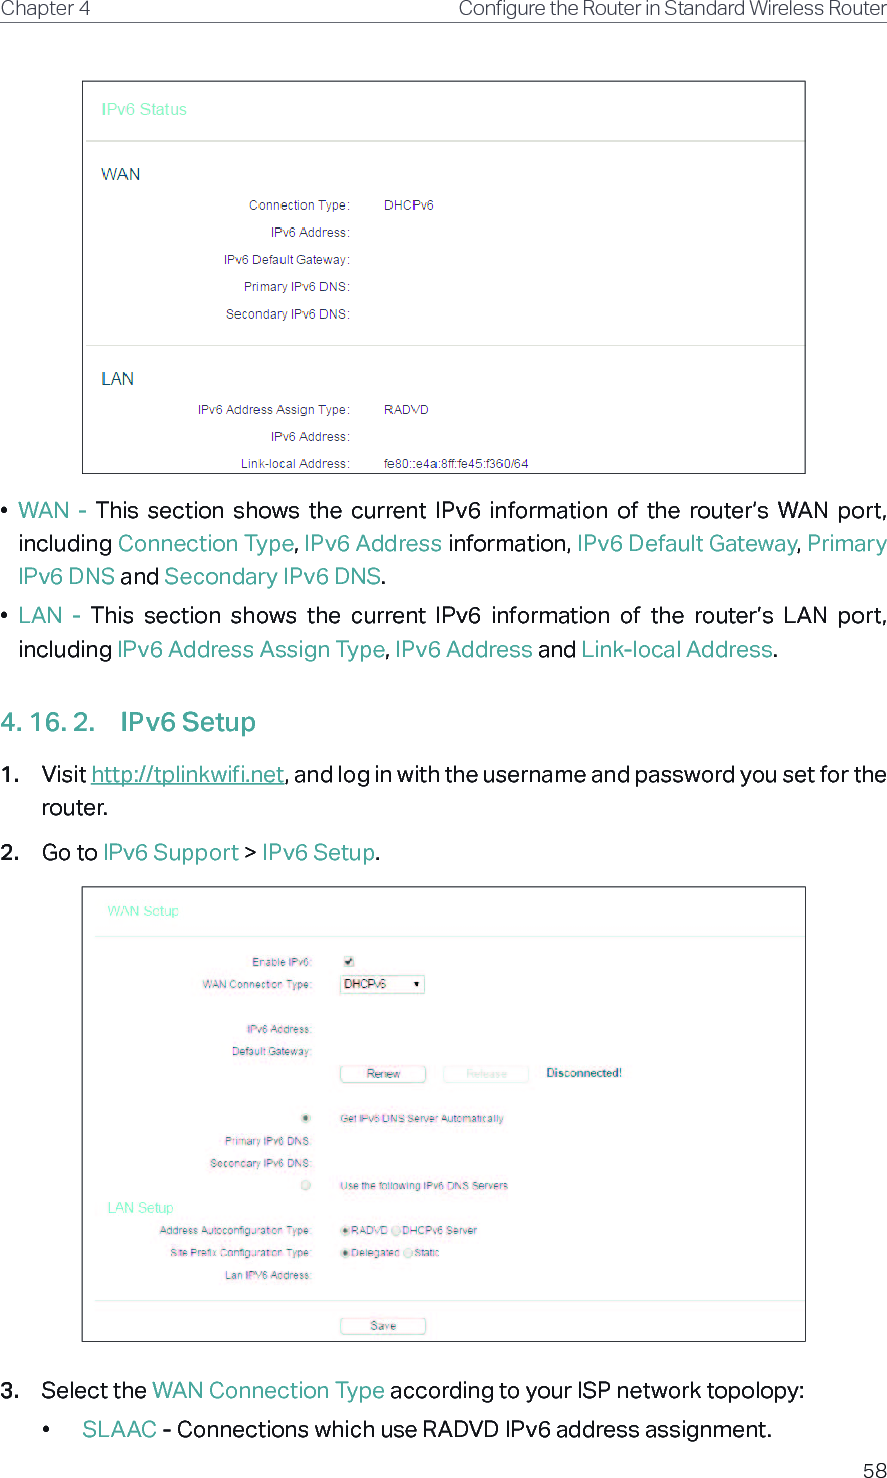 58Chapter 4 &amp;RQƮJXUHWKH5RXWHULQ6WDQGDUG:LUHOHVV5RXWHU•  WAN  -  This  section  shows  the  current  IPv6  information  of  the  router’s  WAN  port, including Connection Type, IPv6 Address information, IPv6 Default Gateway, Primary IPv6 DNS and Secondary IPv6 DNS.•  LAN  -  This  section  shows  the  current  IPv6  information  of  the  router’s  LAN  port, including IPv6 Address Assign Type, IPv6 Address and Link-local Address.4. 16. 2.  IPv6 Setup1.  Visit http://tplinkwifi.net, and log in with the username and password you set for the router.2.  Go to IPv6 Support &gt; IPv6 Setup.3.  Select the WAN Connection Type according to your ISP network topolopy:•  SLAAC - Connections which use RADVD IPv6 address assignment.